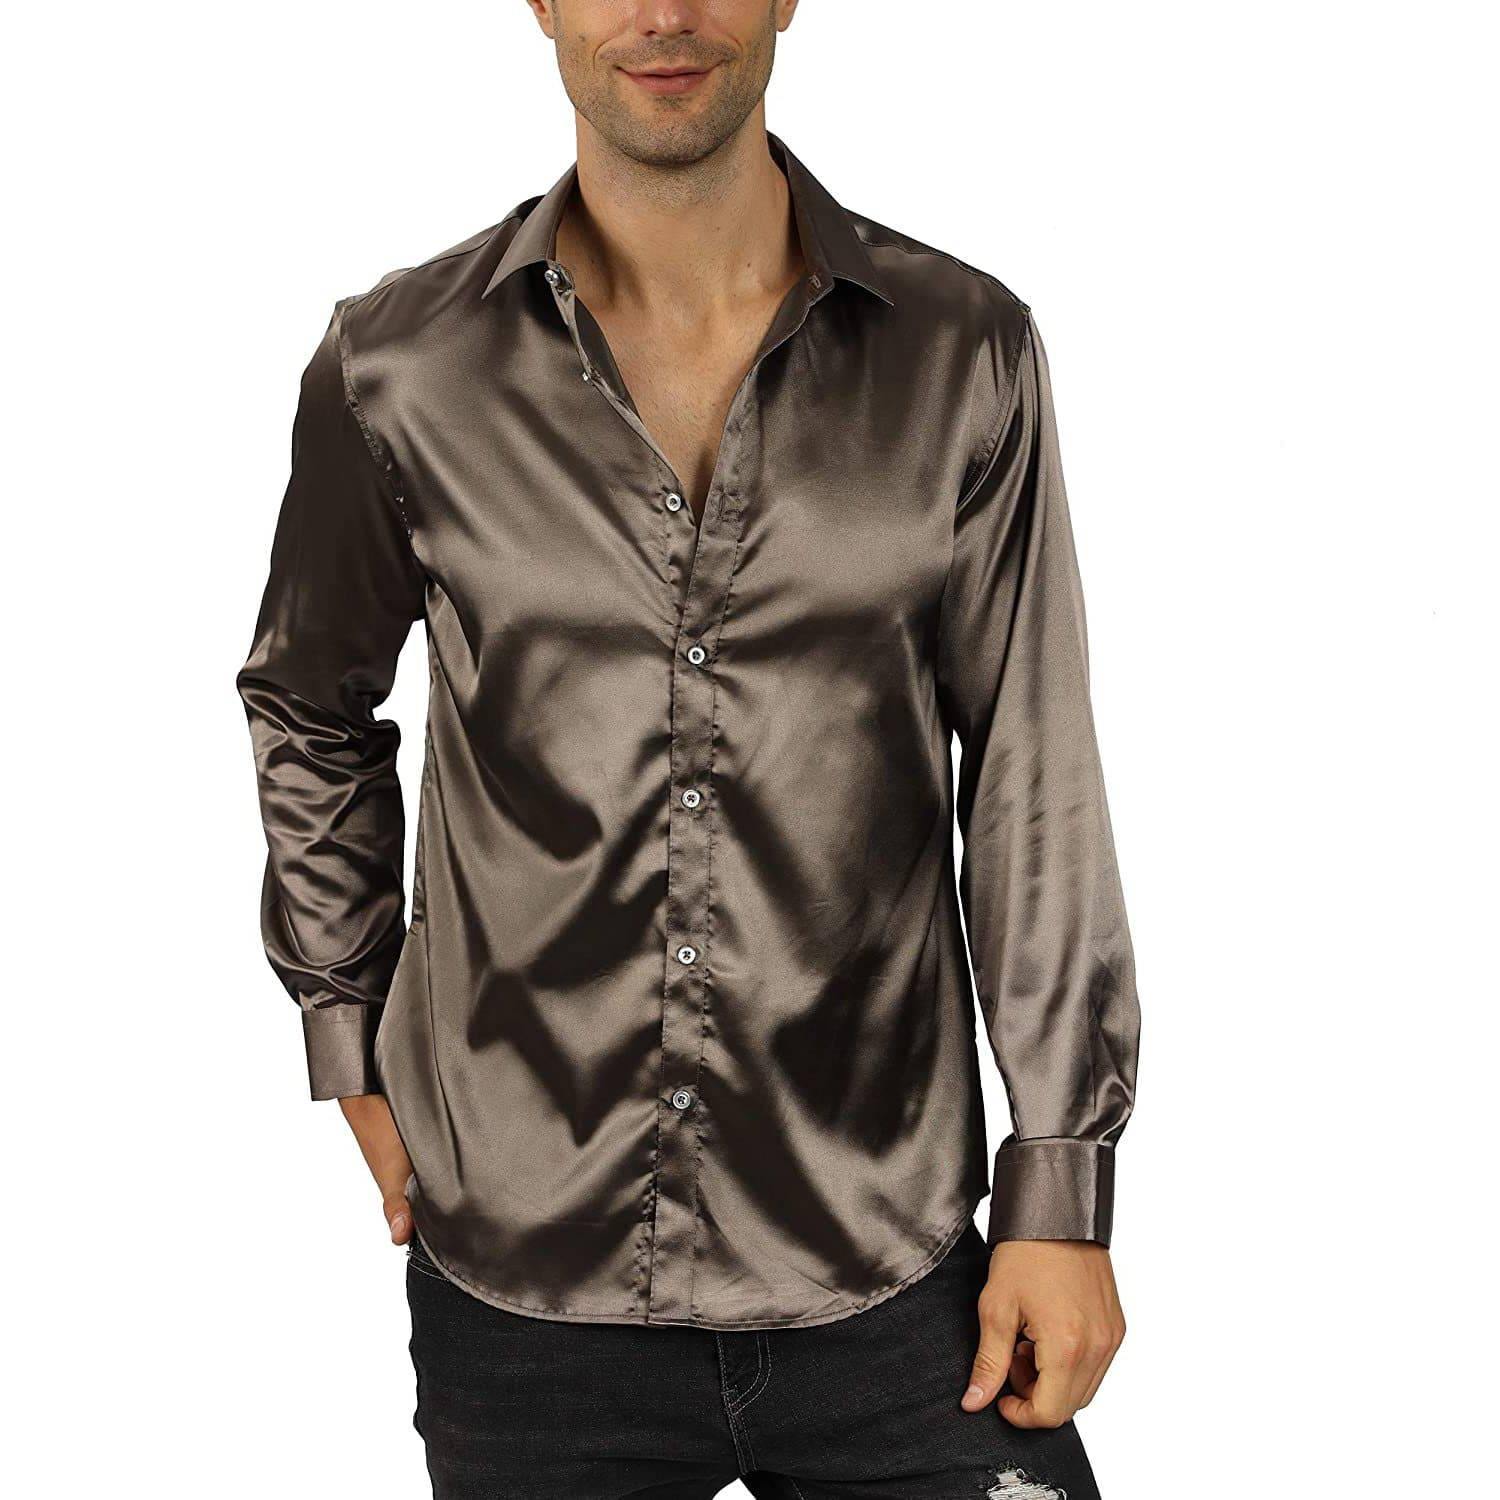 Sophisticated Men's Long Sleeve Satin Silk Shirt for Dressy or Casual  Outfits